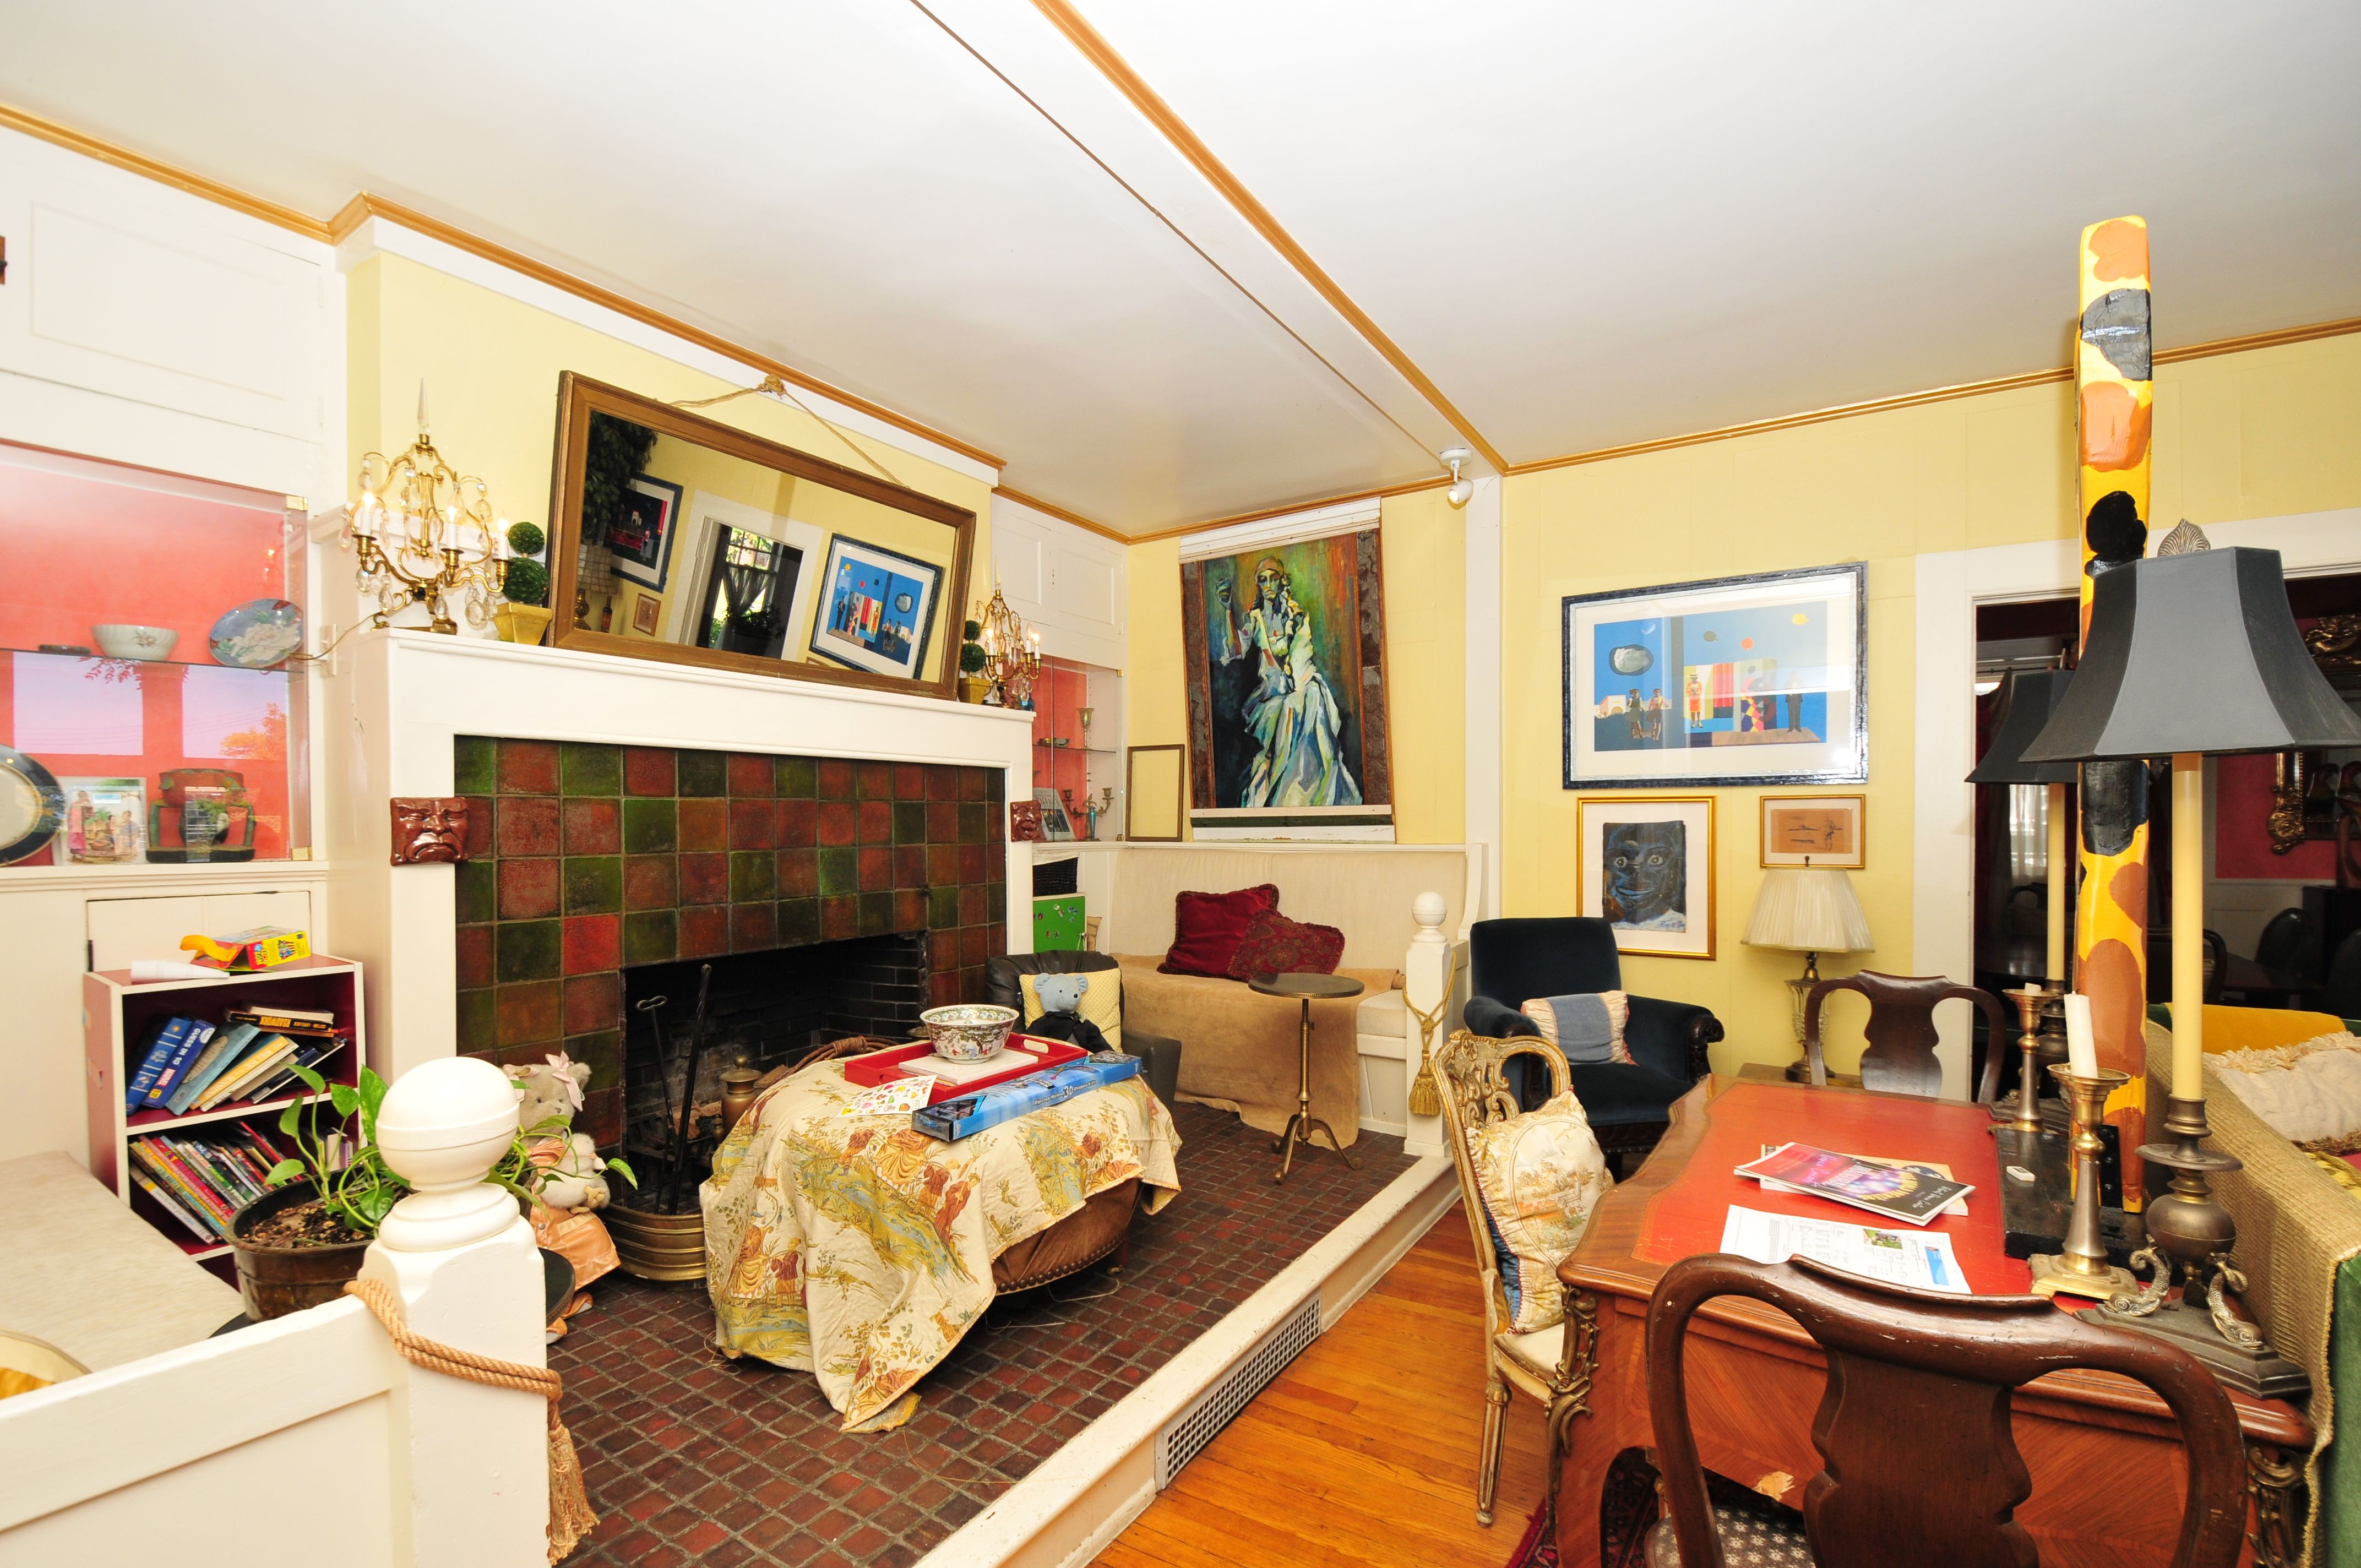 The interior of the home with yellow walls, a detailed fireplace and furniture inside.